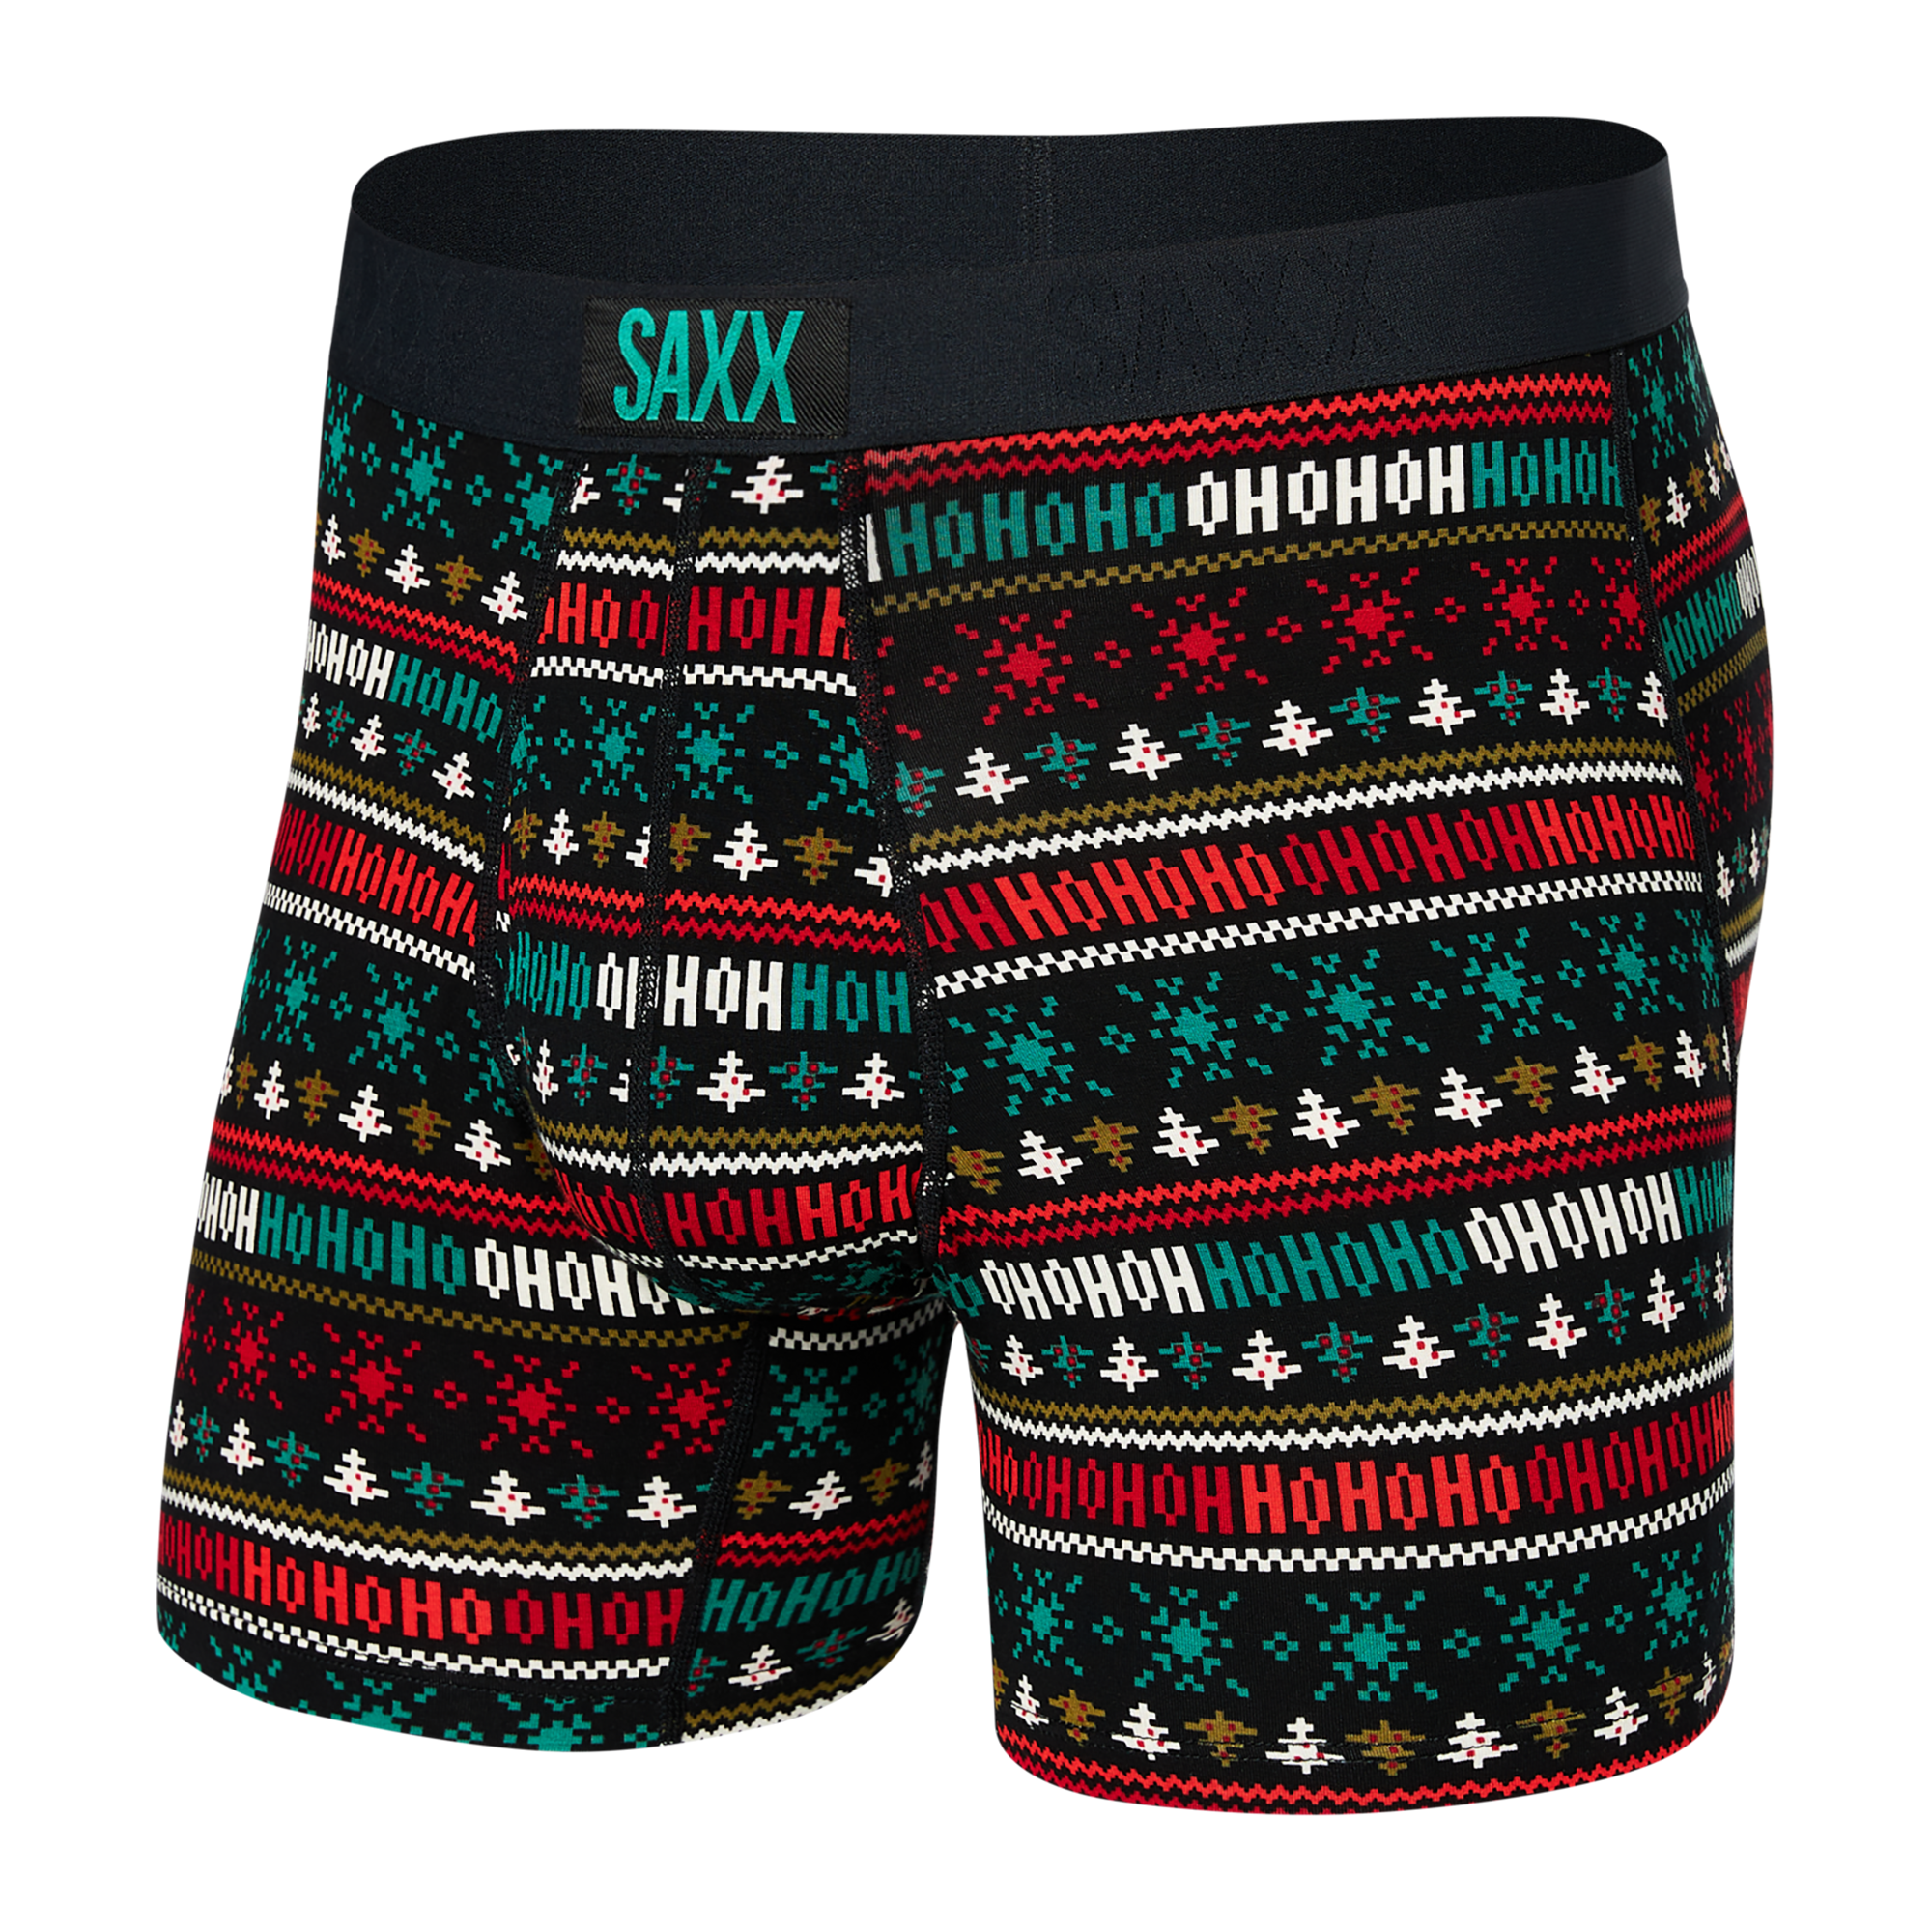 Saxx Kinetic HD Boxer - Hometown Sports and Apparel